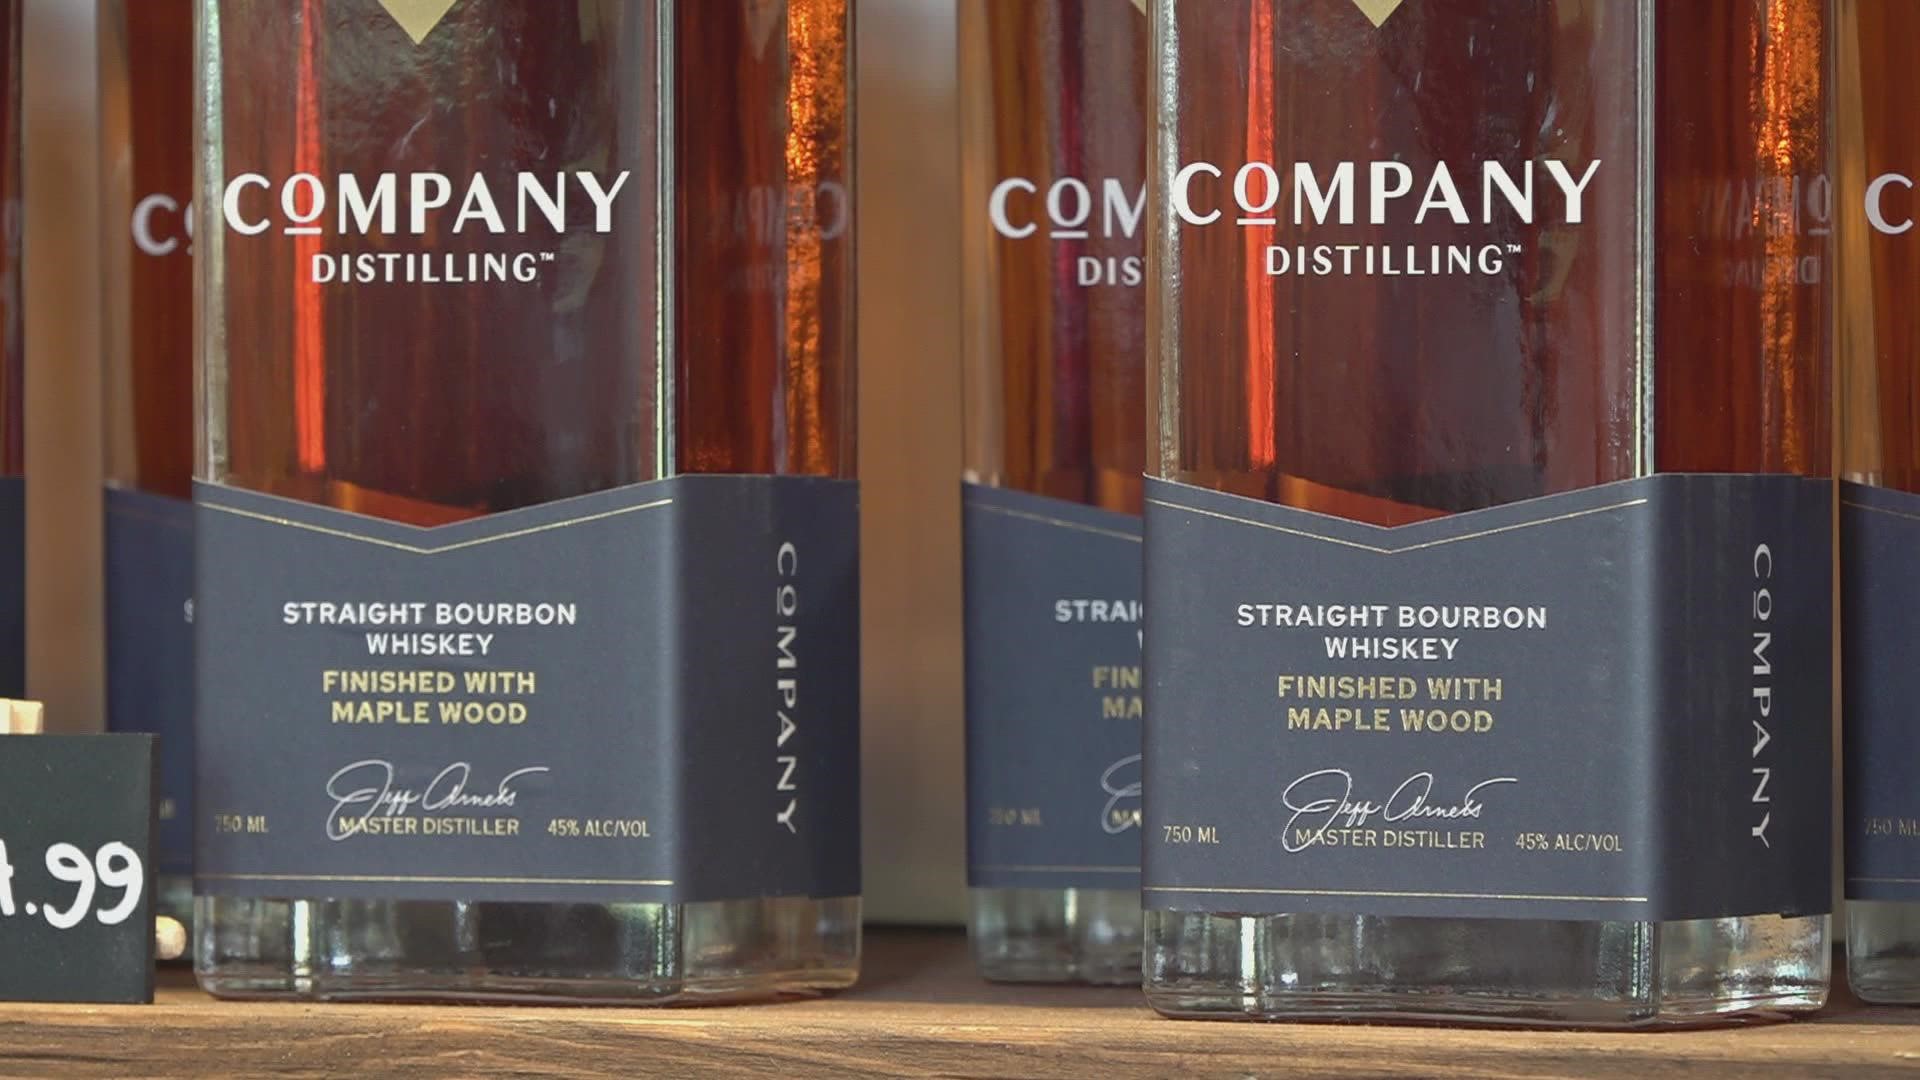 Moonshine and mountains have blended for centuries in East Tennessee. Blount county's first distillery continues the tradition at a familiar landmark in Townsend.